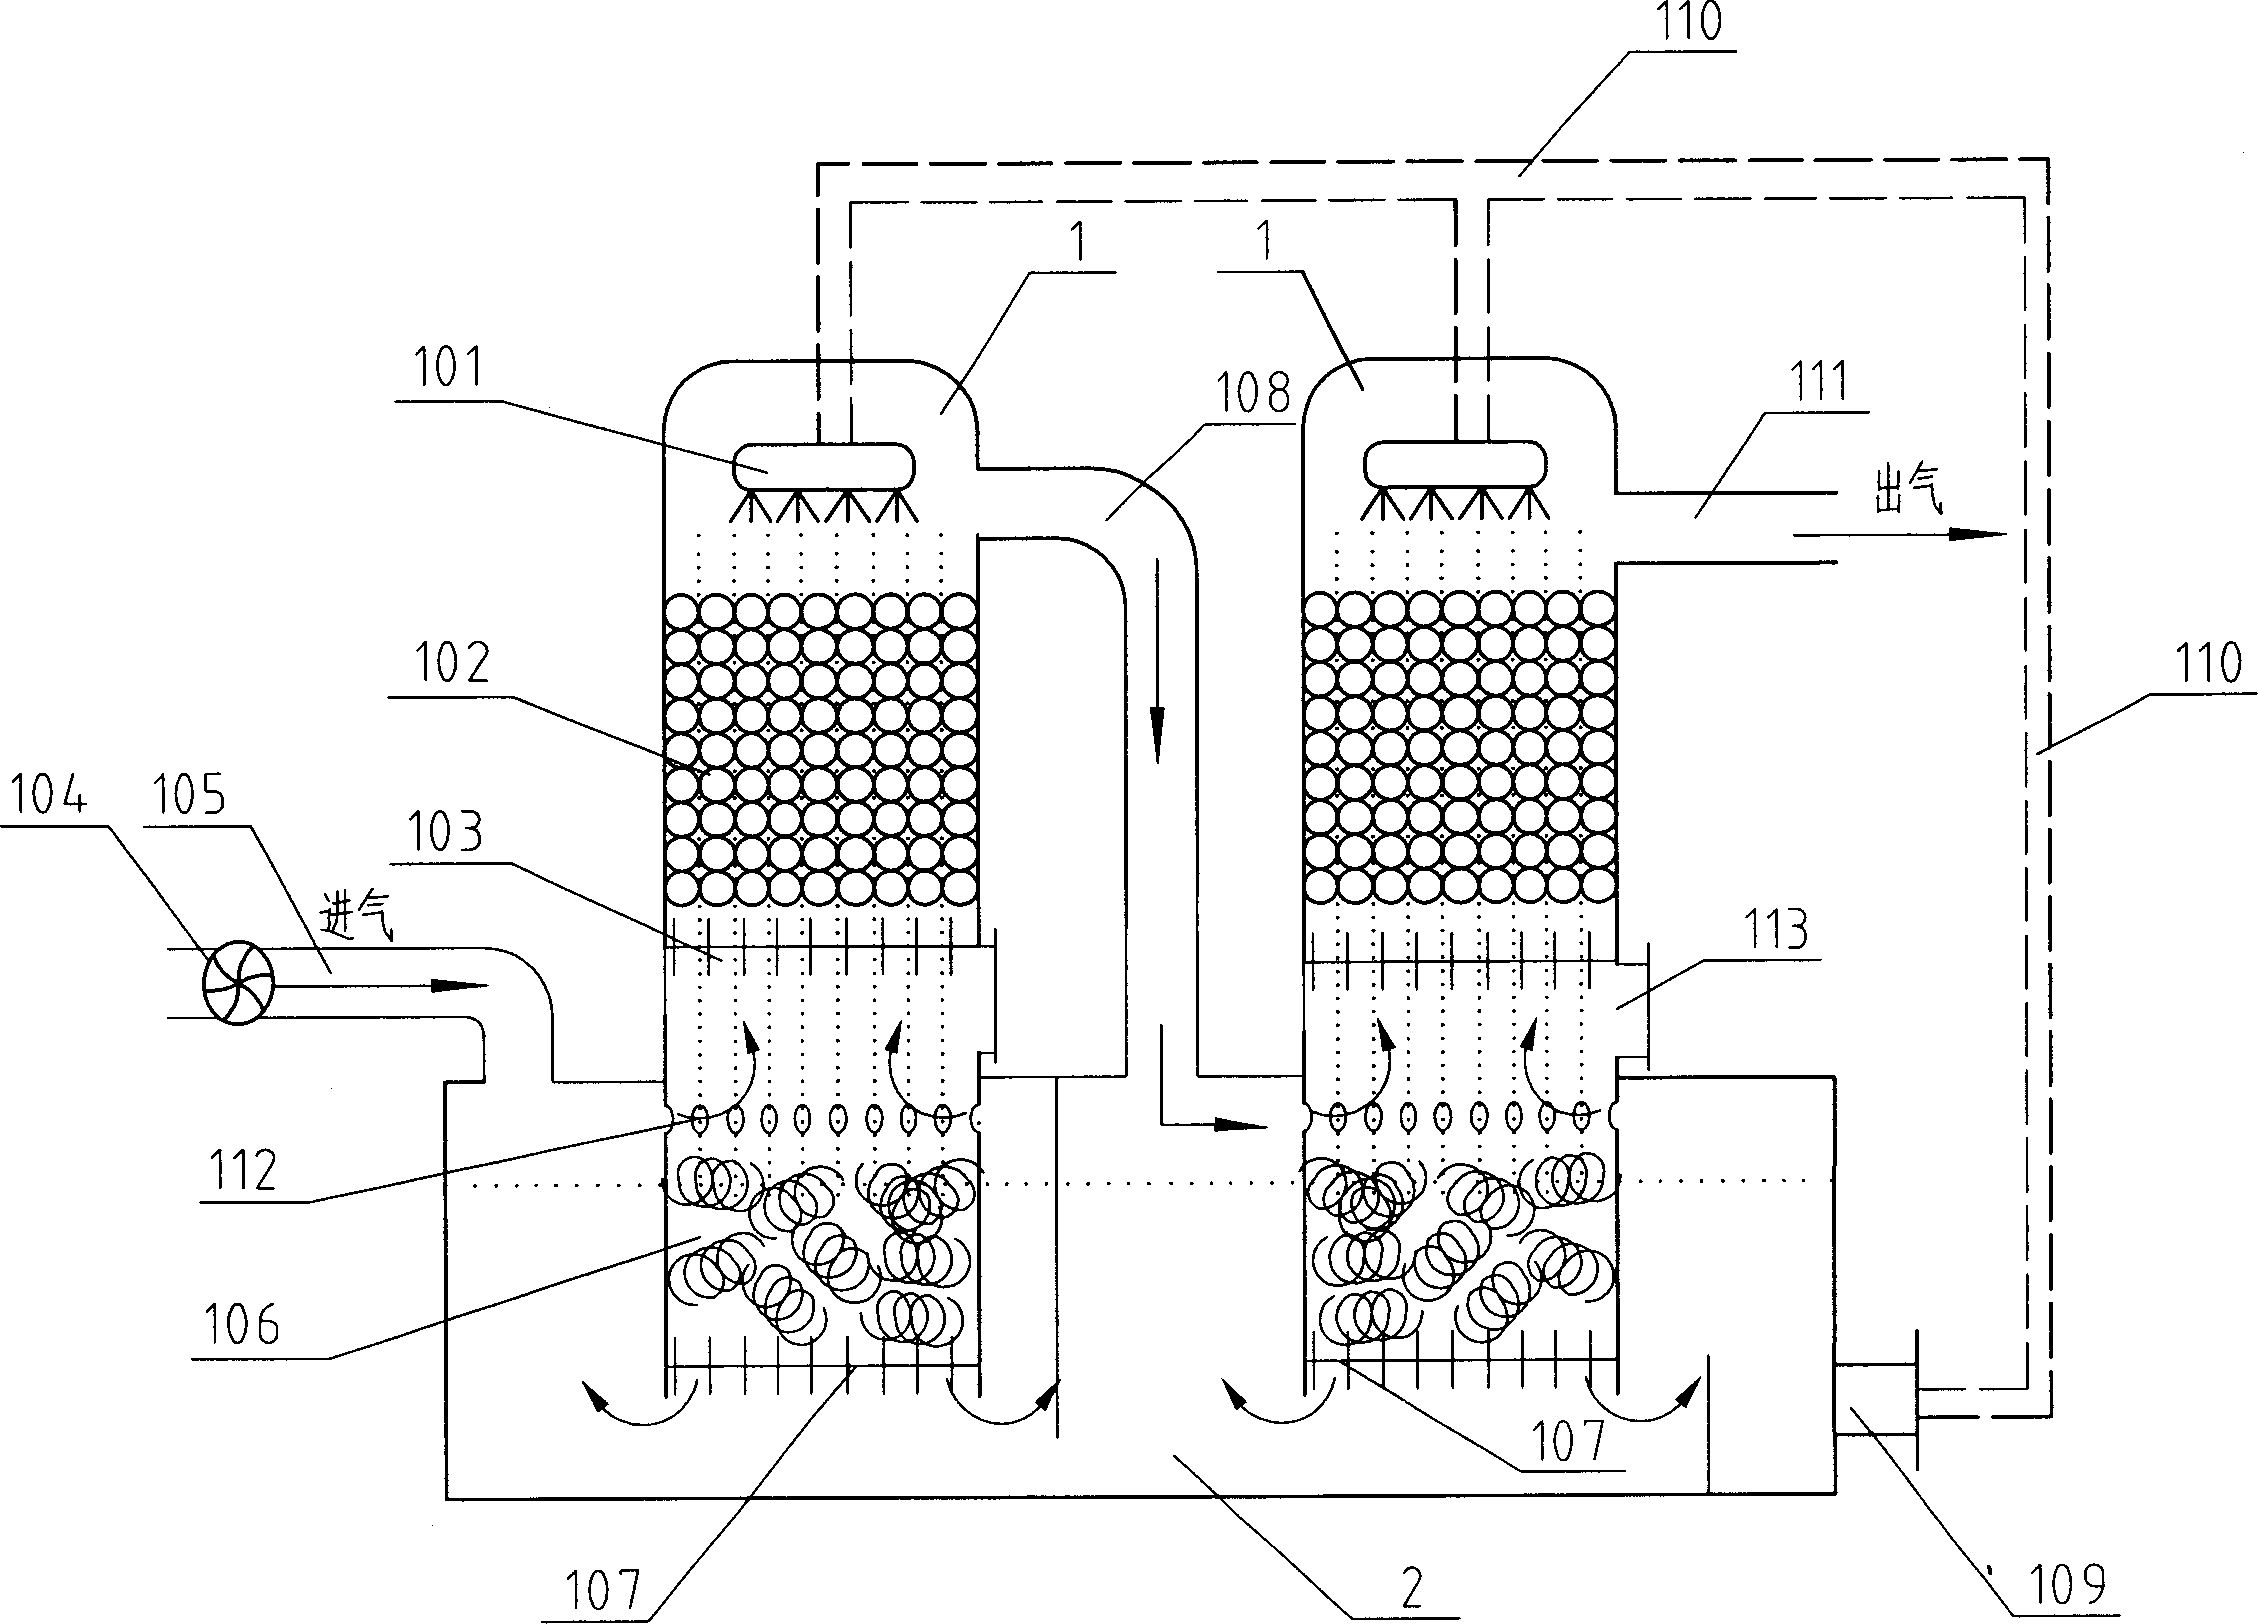 Chlorine leakage absorption device and method